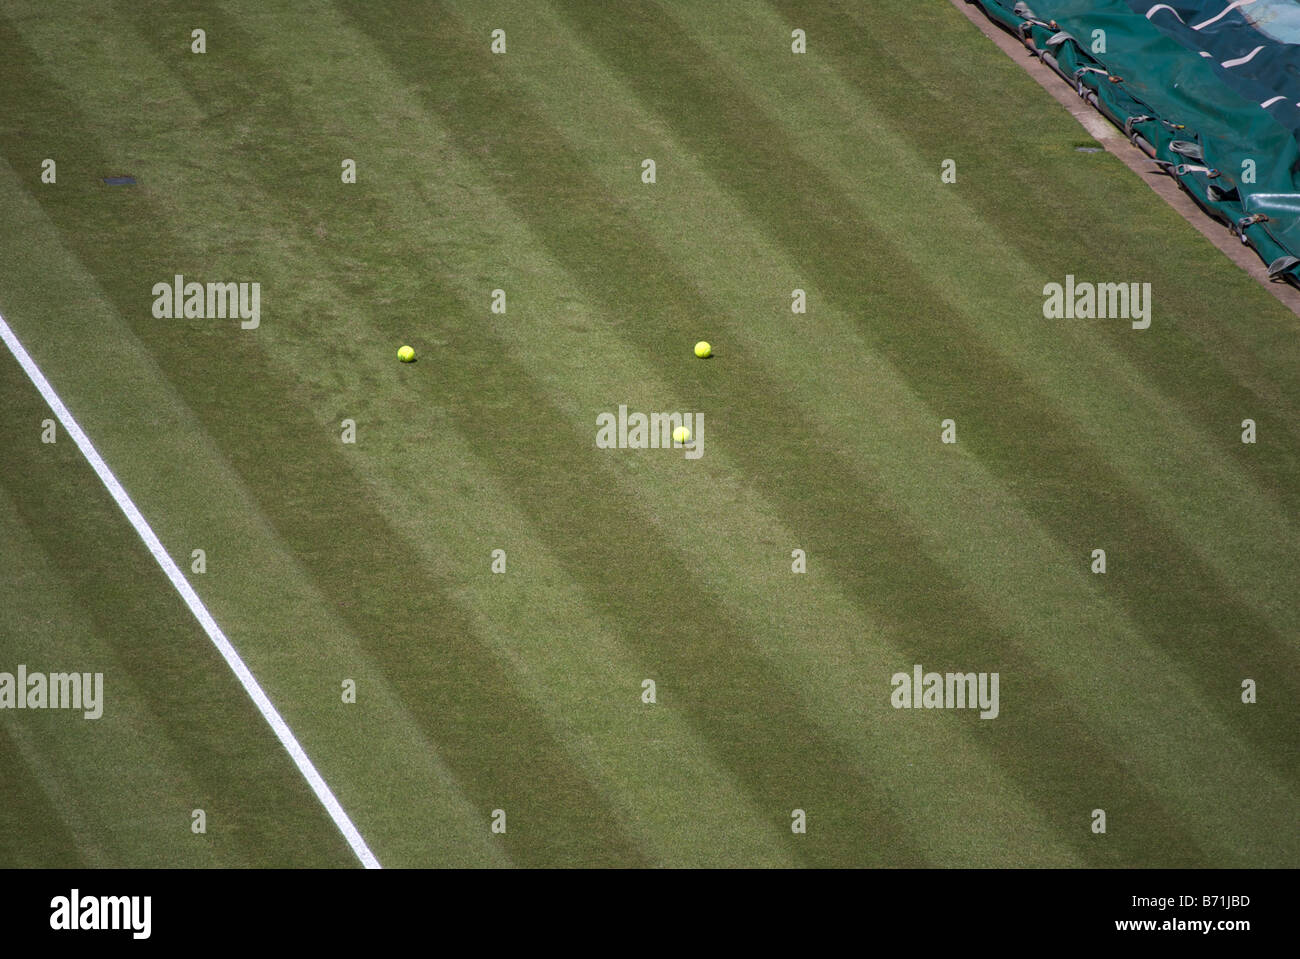 3 tennis balls lay on the grass, waiting for a ball boy to collect them by the side of court number 1, Wimbledon Stock Photo